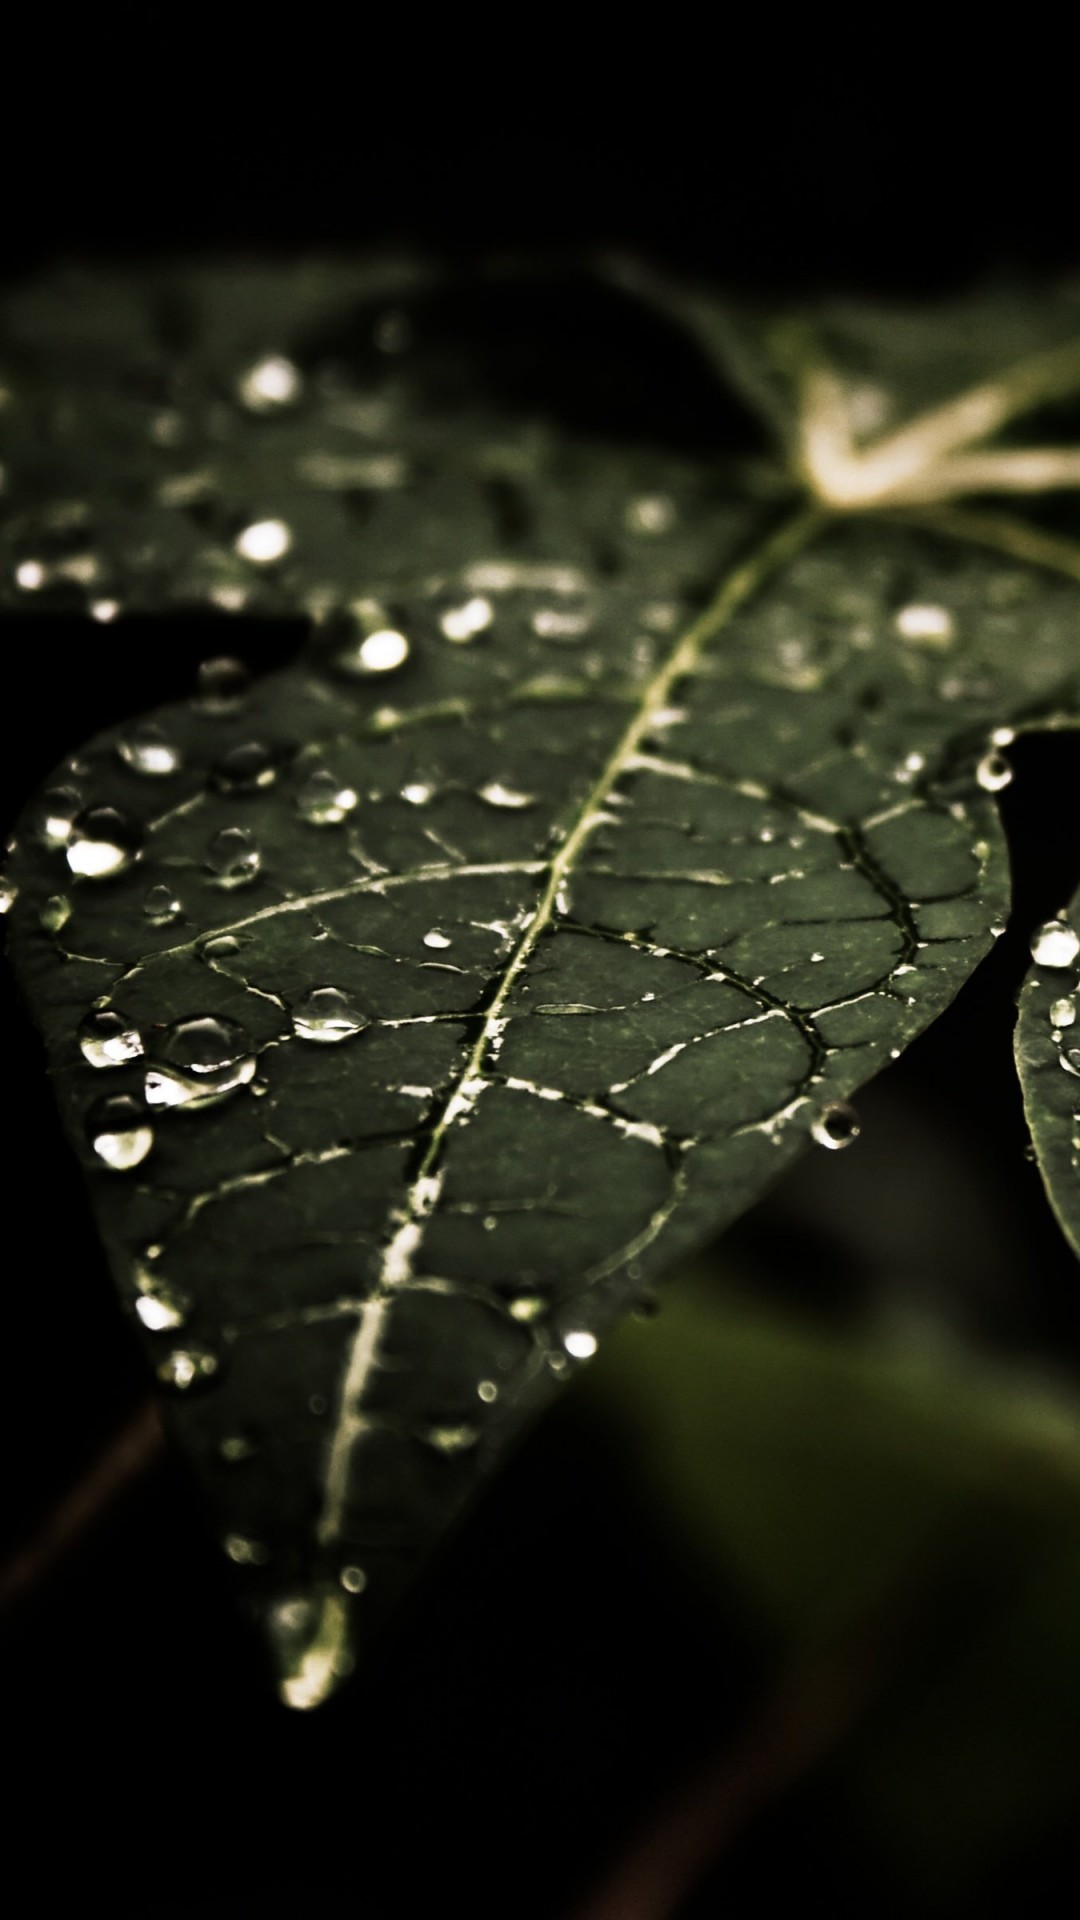 Droplets On Leaves Wallpaper for SAMSUNG Galaxy Note 3